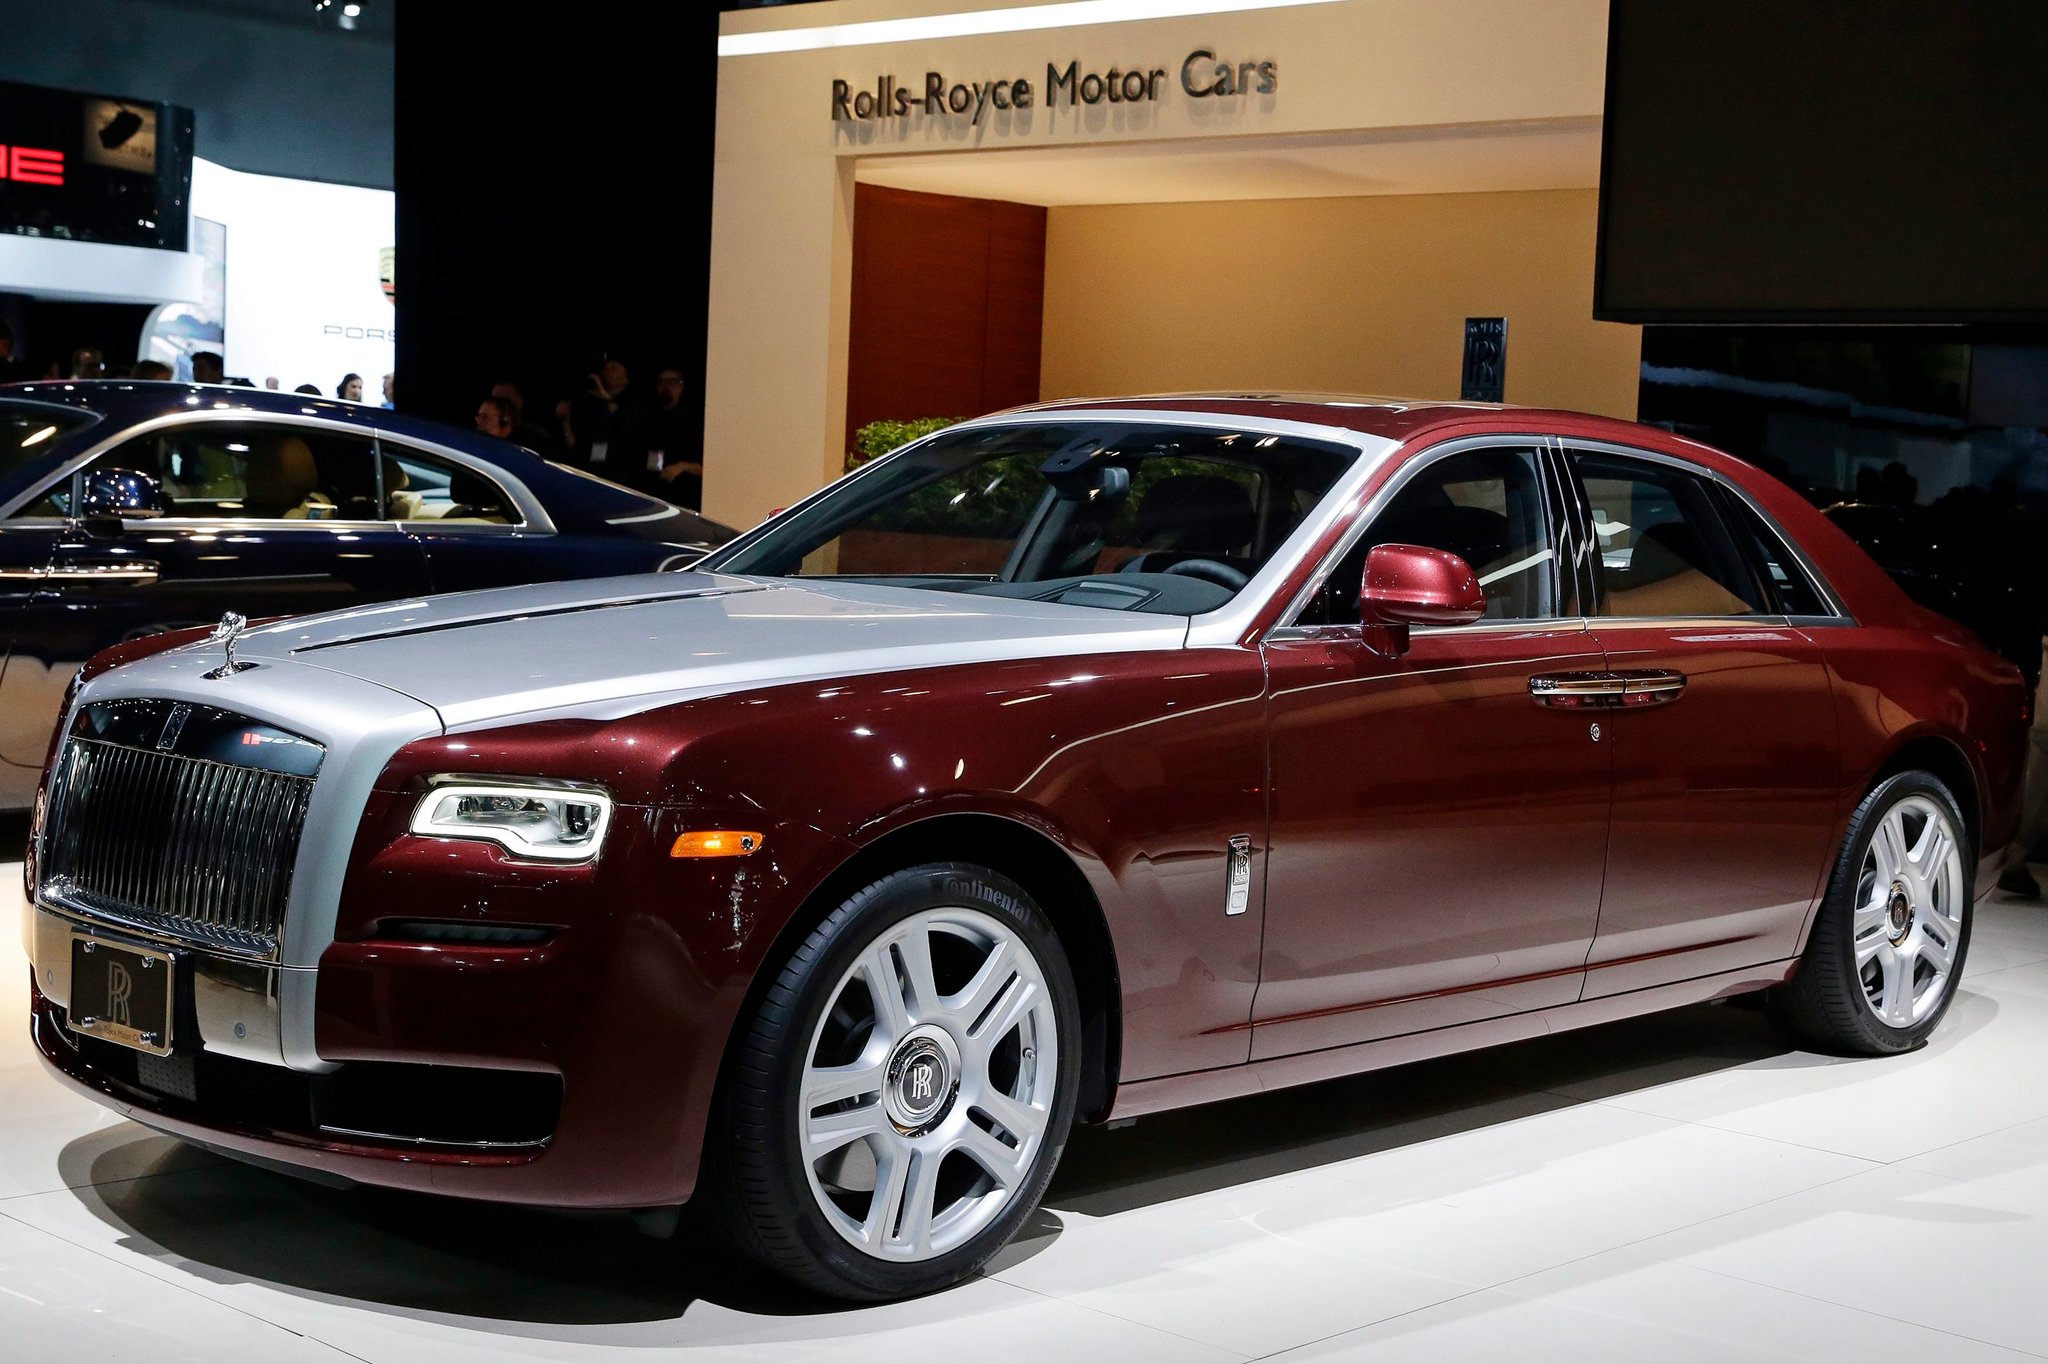 2015 Rolls-Royce Ghost Series II: An Entry-Level Rolls - The New York Times